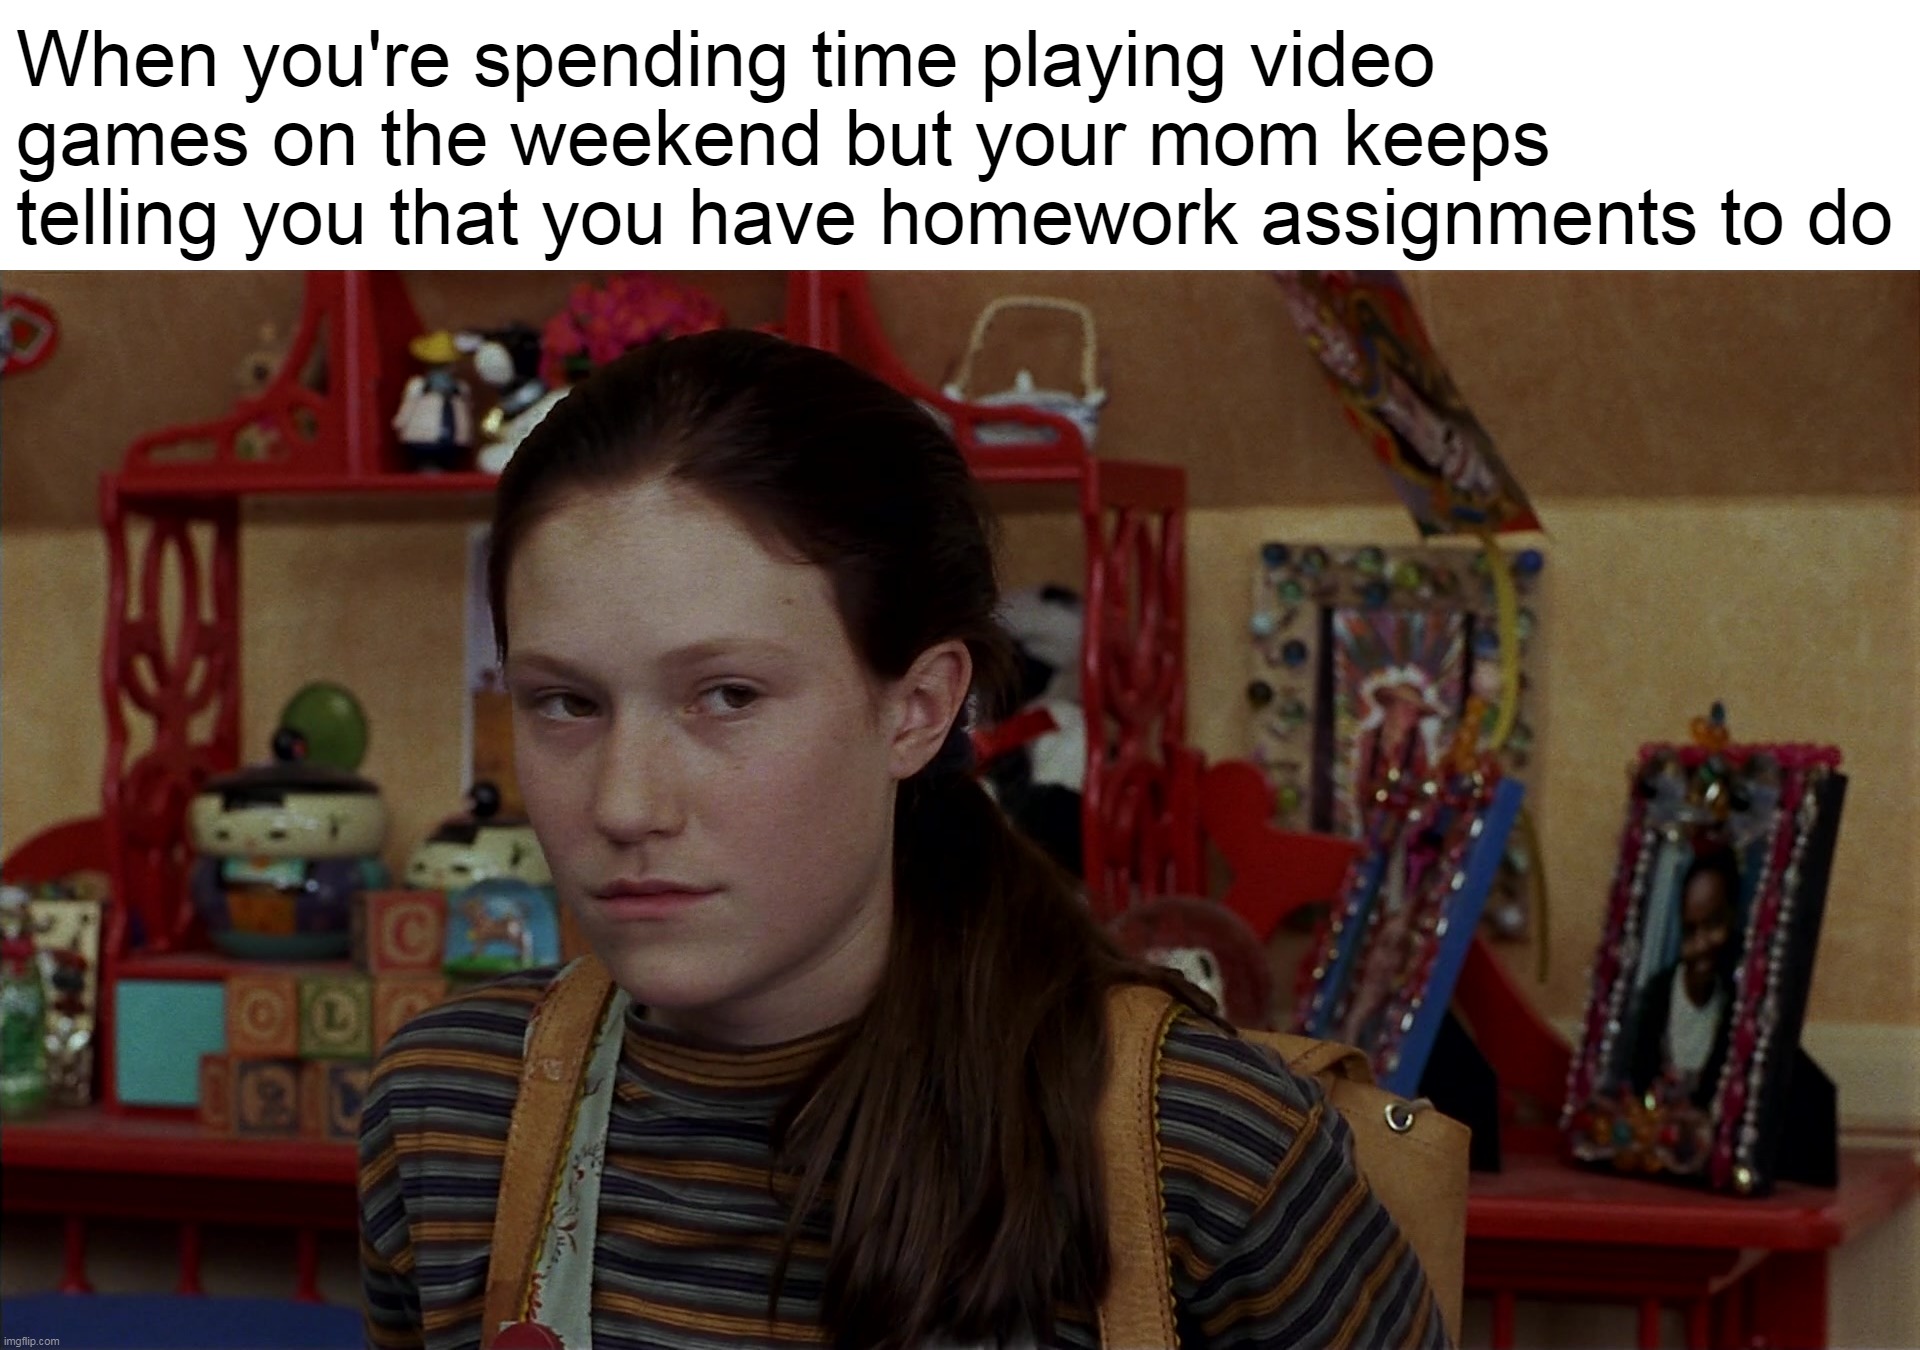 When you're spending time playing video games on the weekend but your mom keeps telling you that you have homework assignments to do | image tagged in meme,memes,funny,humor | made w/ Imgflip meme maker